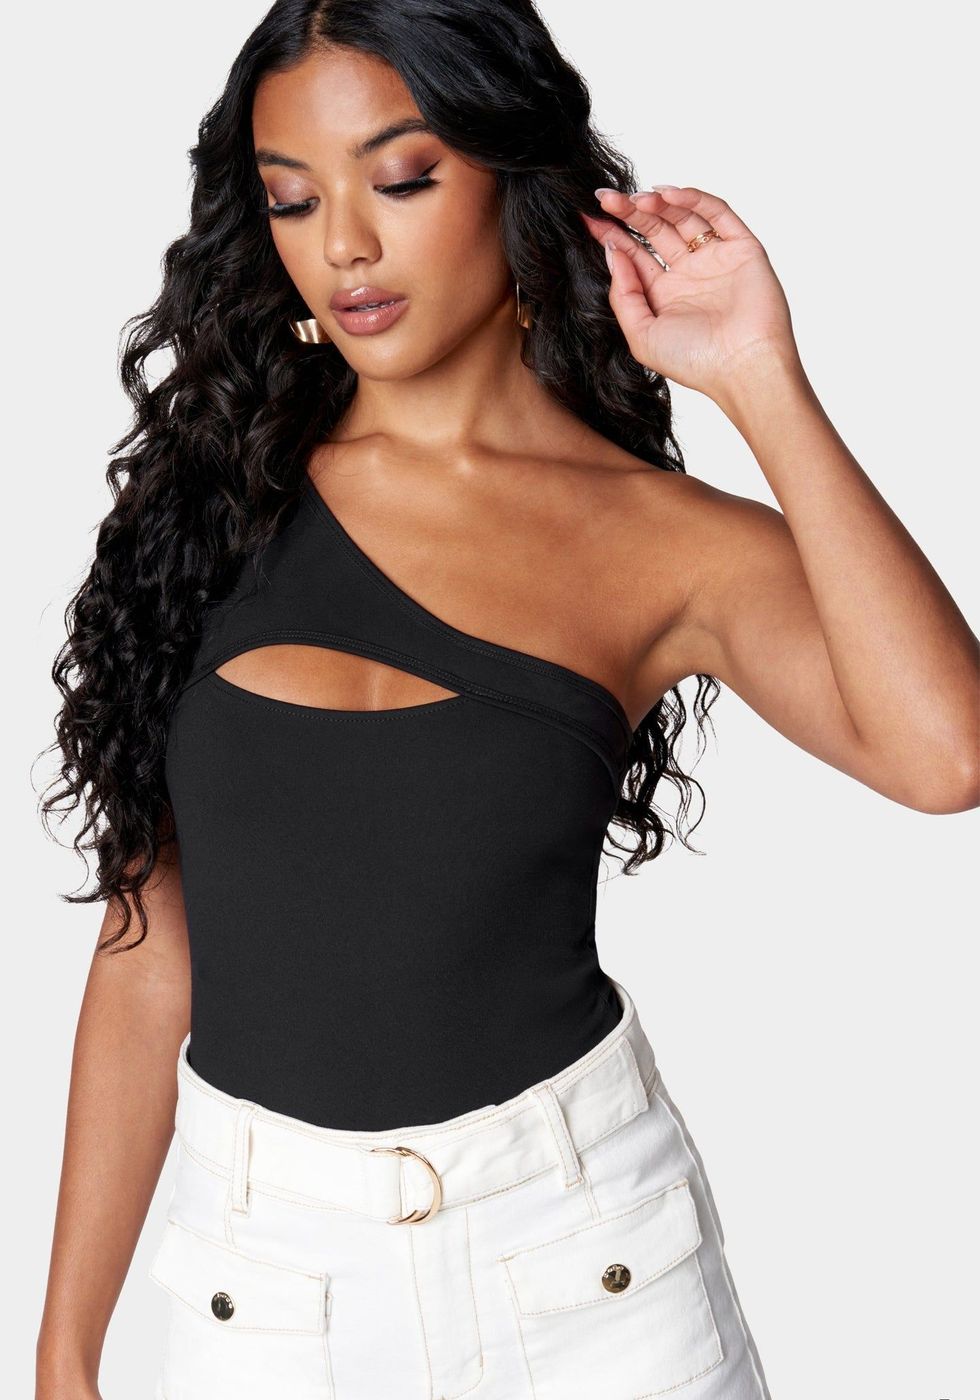 10 Online Shops Like boohoo For Cute and Cheap Clothes - Society19 UK   Online shopping sites clothes, Cheap online clothing stores, Womens clothing  sites